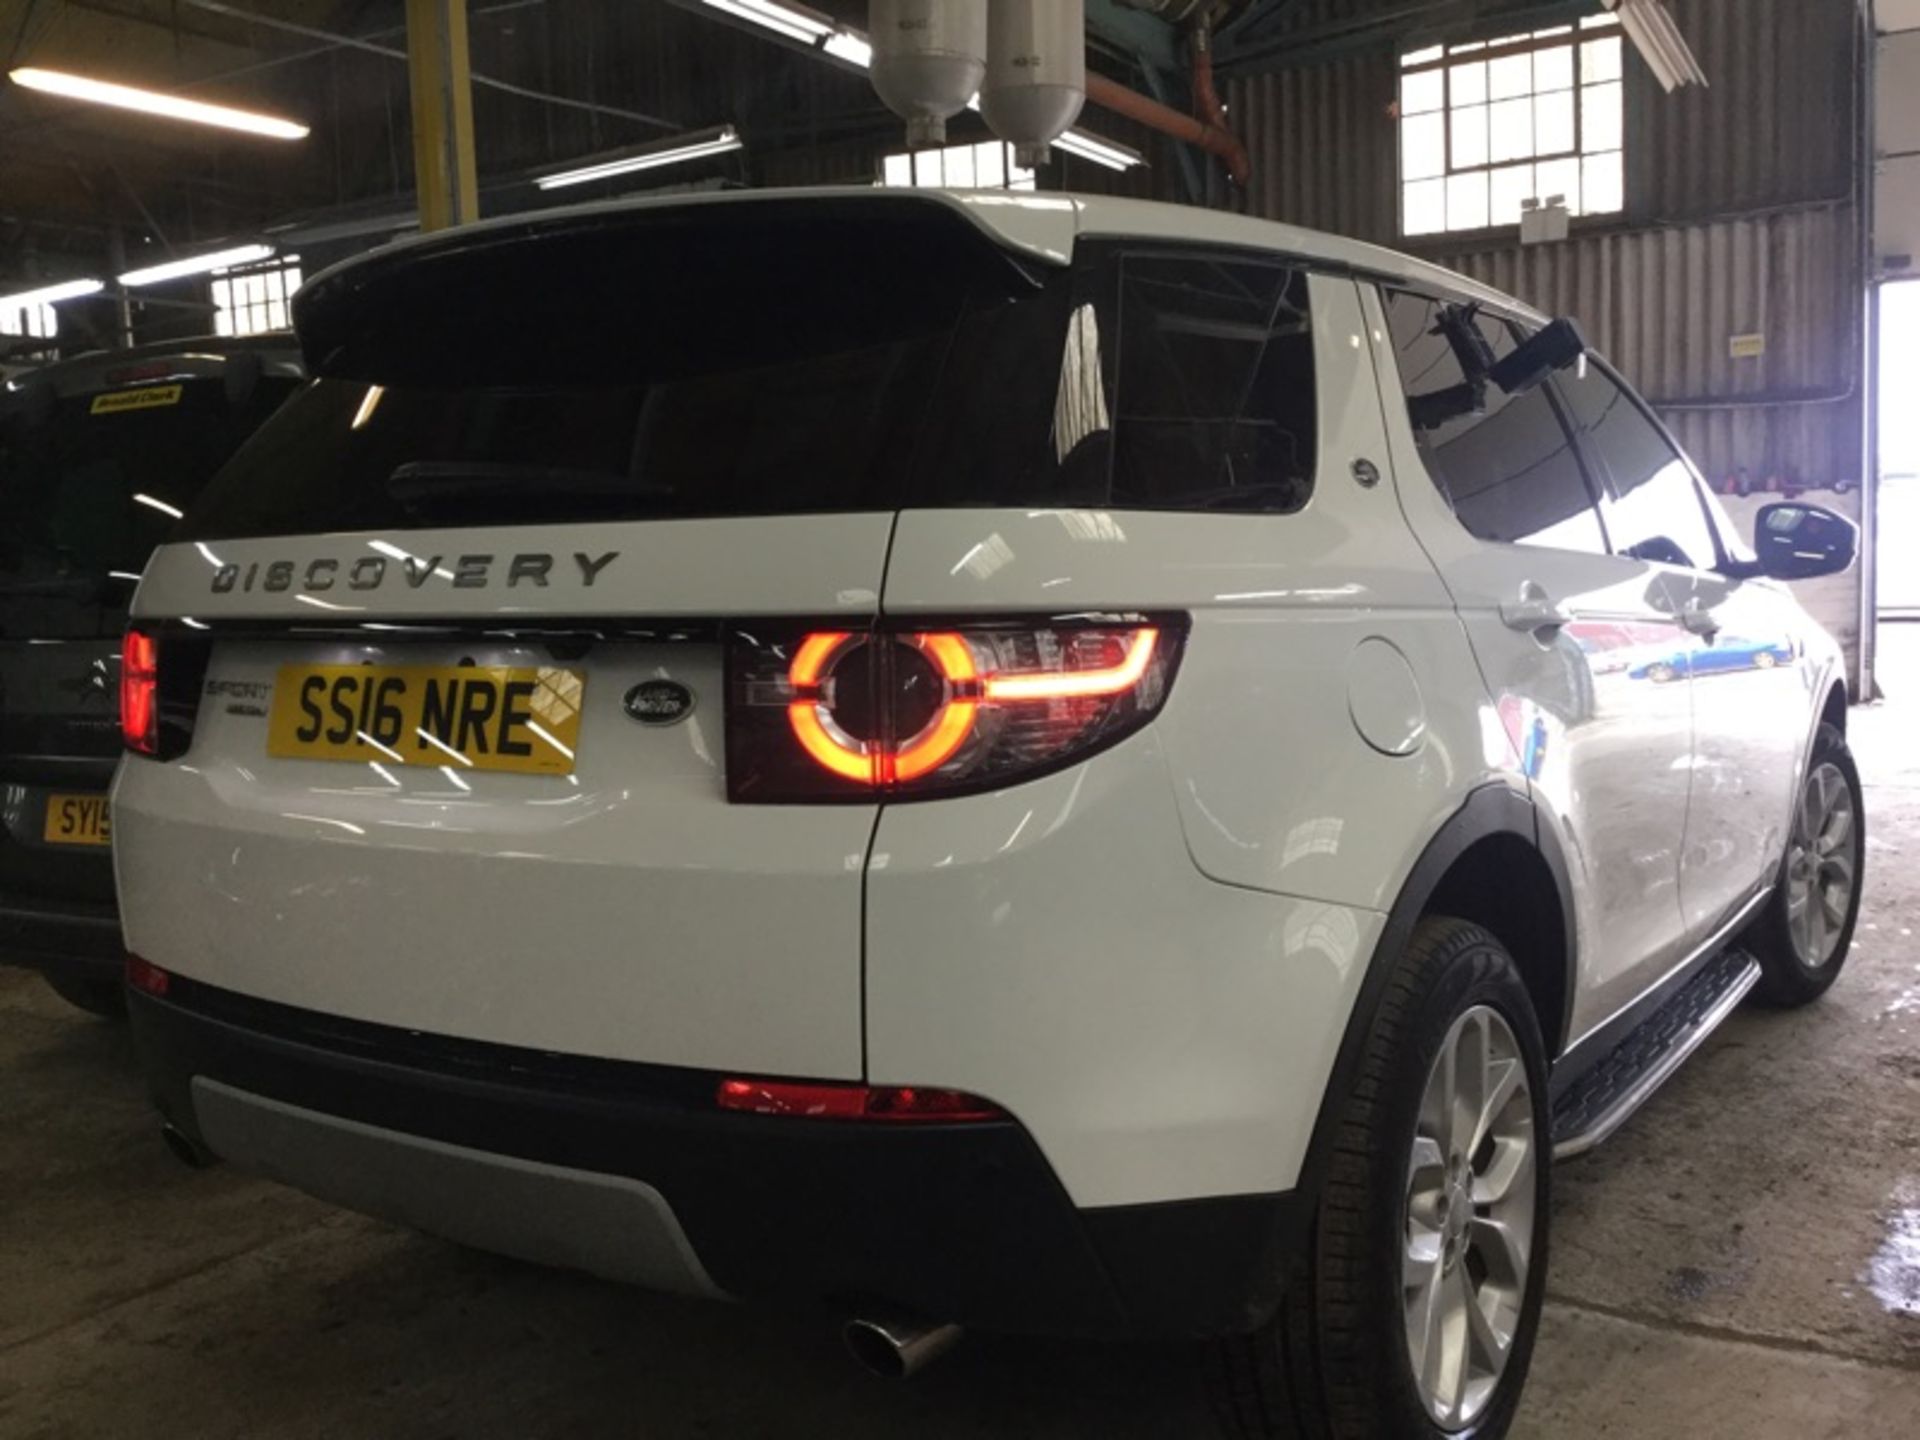 ** ON SALE ** Land Rover Discovery Sport TD4 180 HSE 2.0 2016'16 Reg'-Alloy Wheels-7 seats- - Image 5 of 9